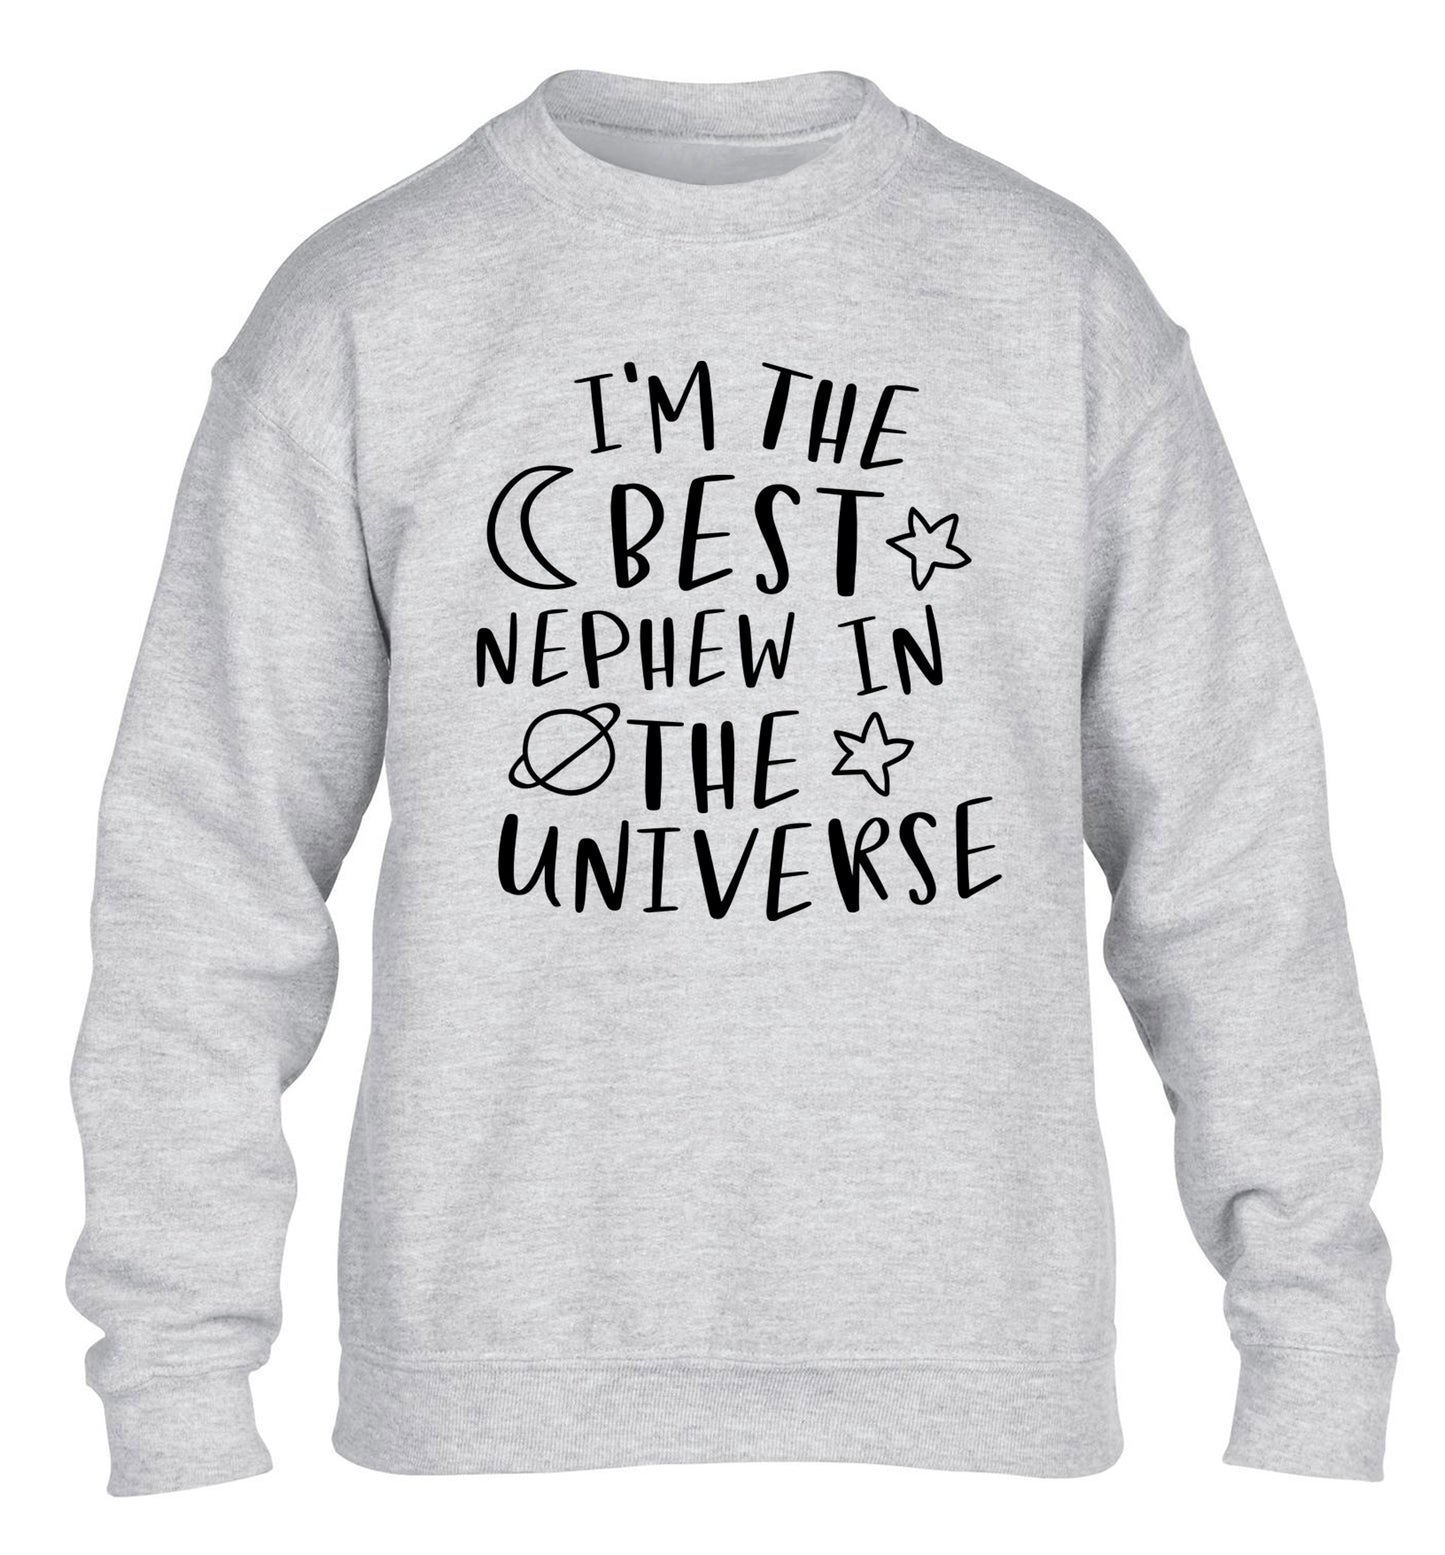 I'm the best nephew in the universe children's grey sweater 12-13 Years